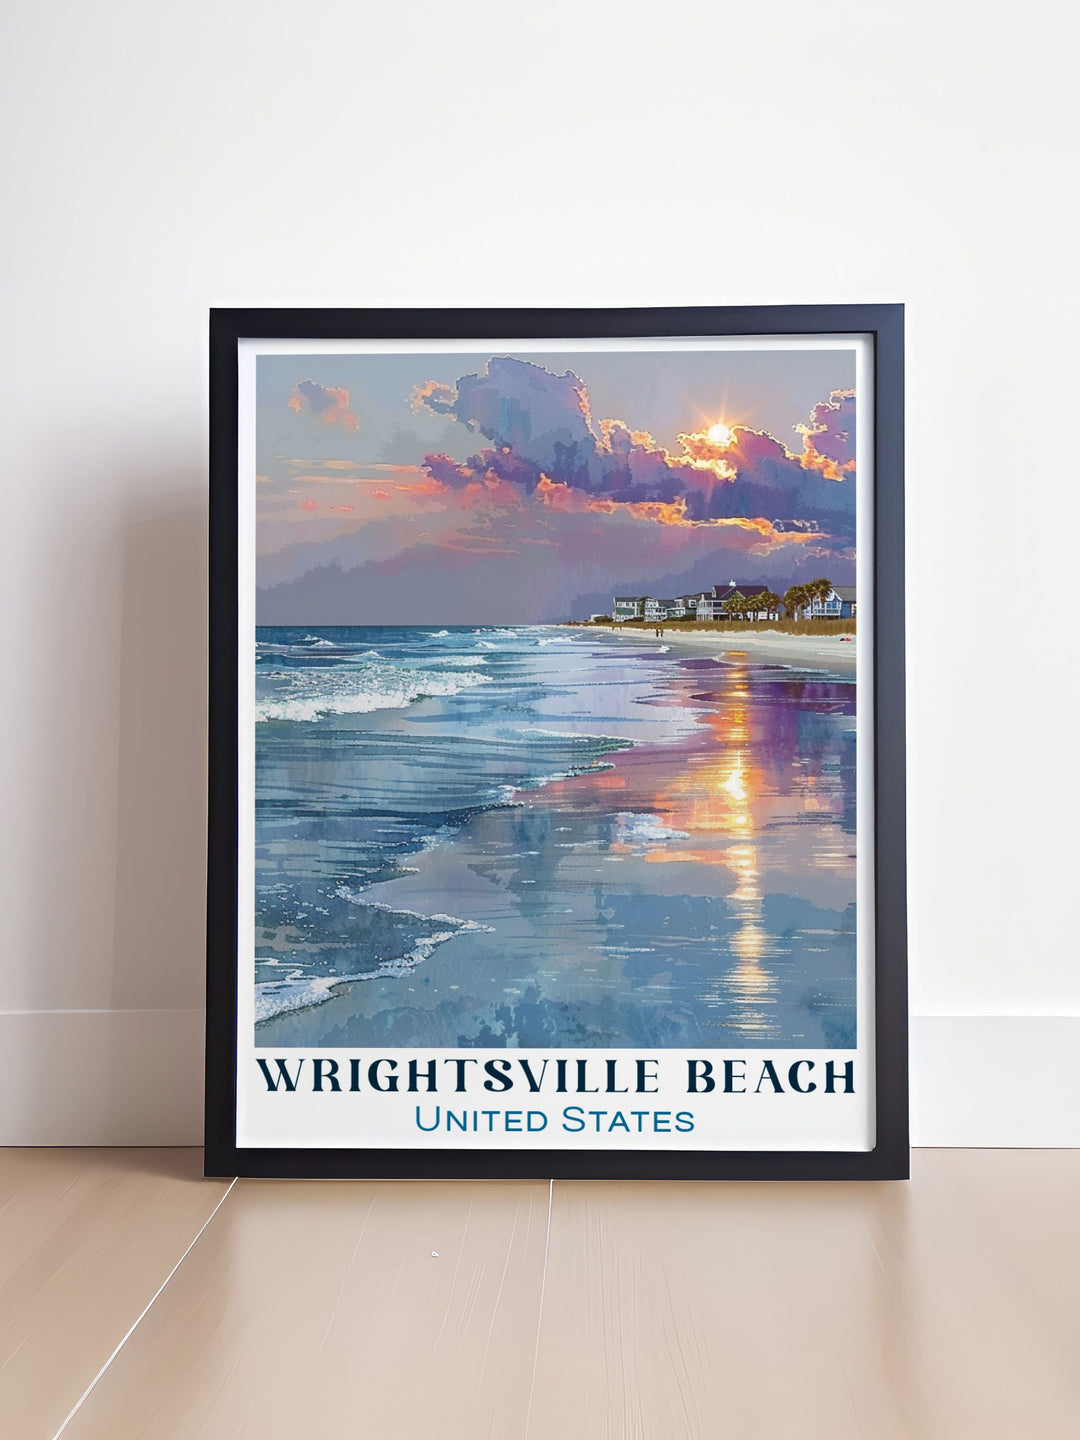 Modern wall decor featuring the picturesque setting of Wrightsville Beach, North Carolina. This print highlights the beachs stunning landscapes and vibrant community, perfect for adding a contemporary touch of coastal charm to your home decor.